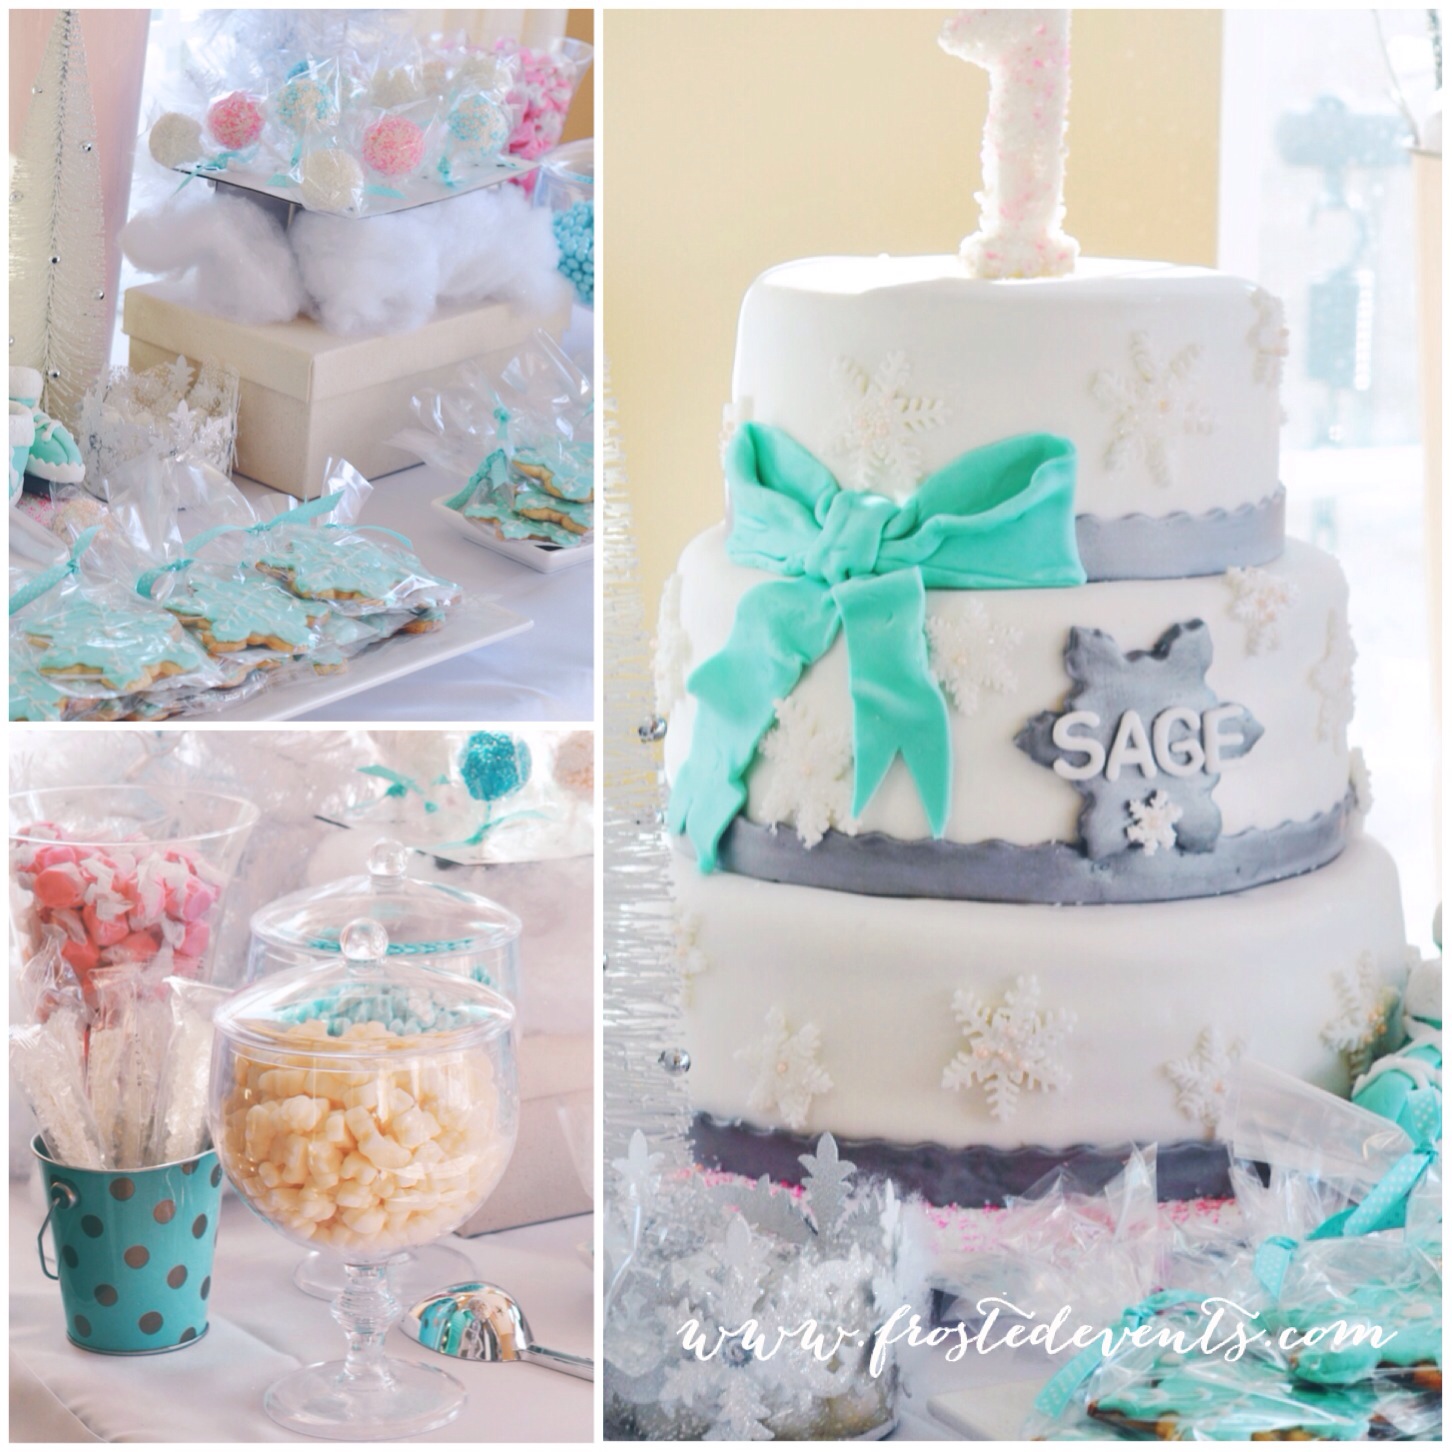 Winter-Wonderland-First-Birthday-Party by www.frostedevents.com